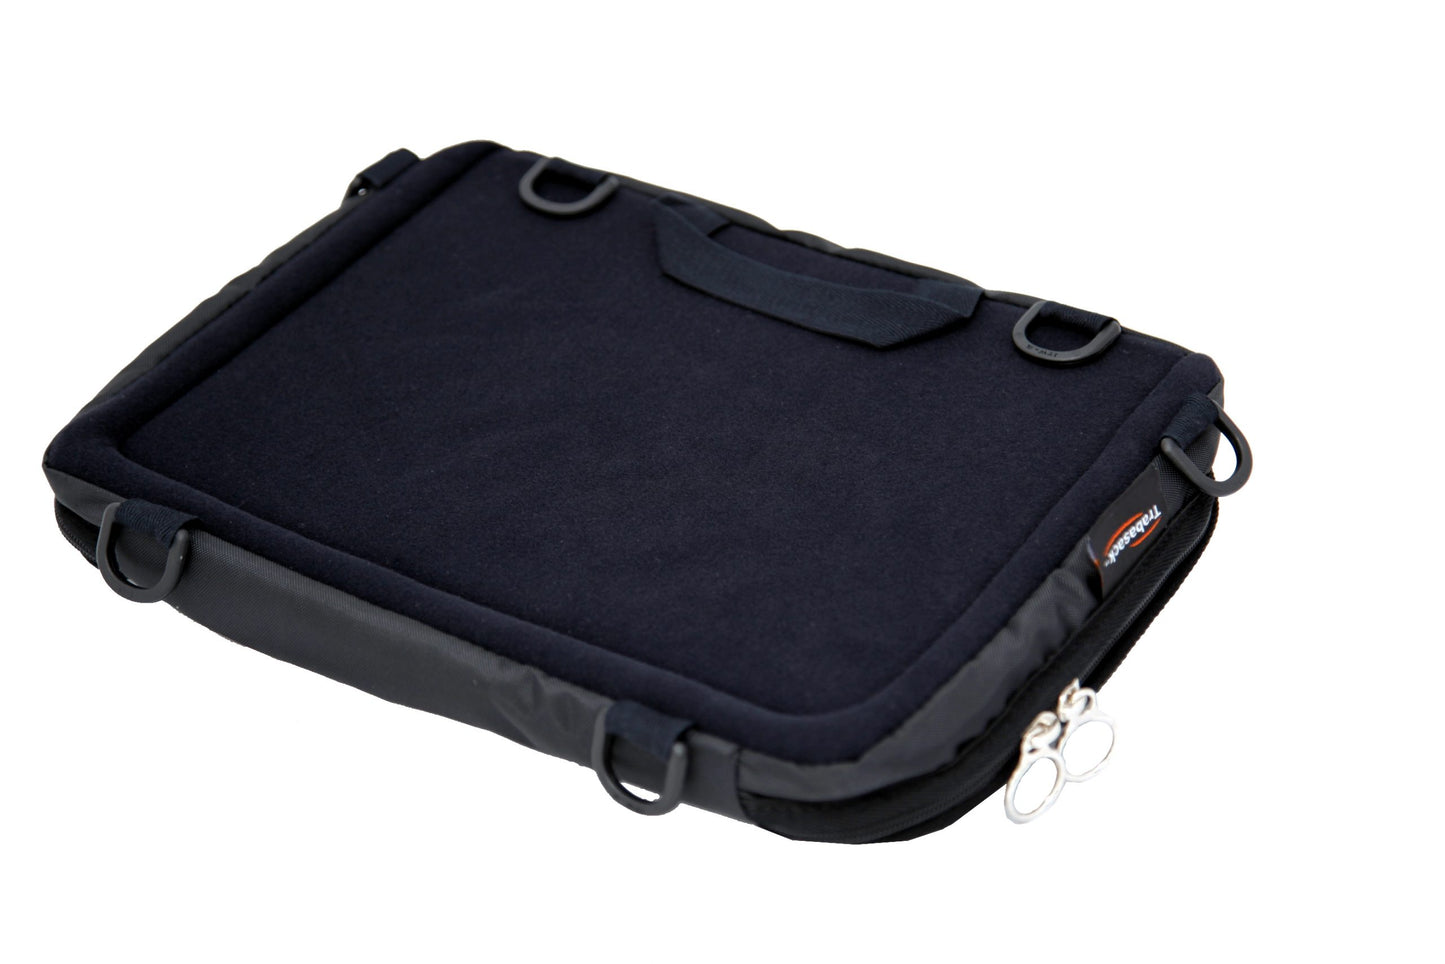 Trabasack Mini Connect wheelchair lap tray and bag